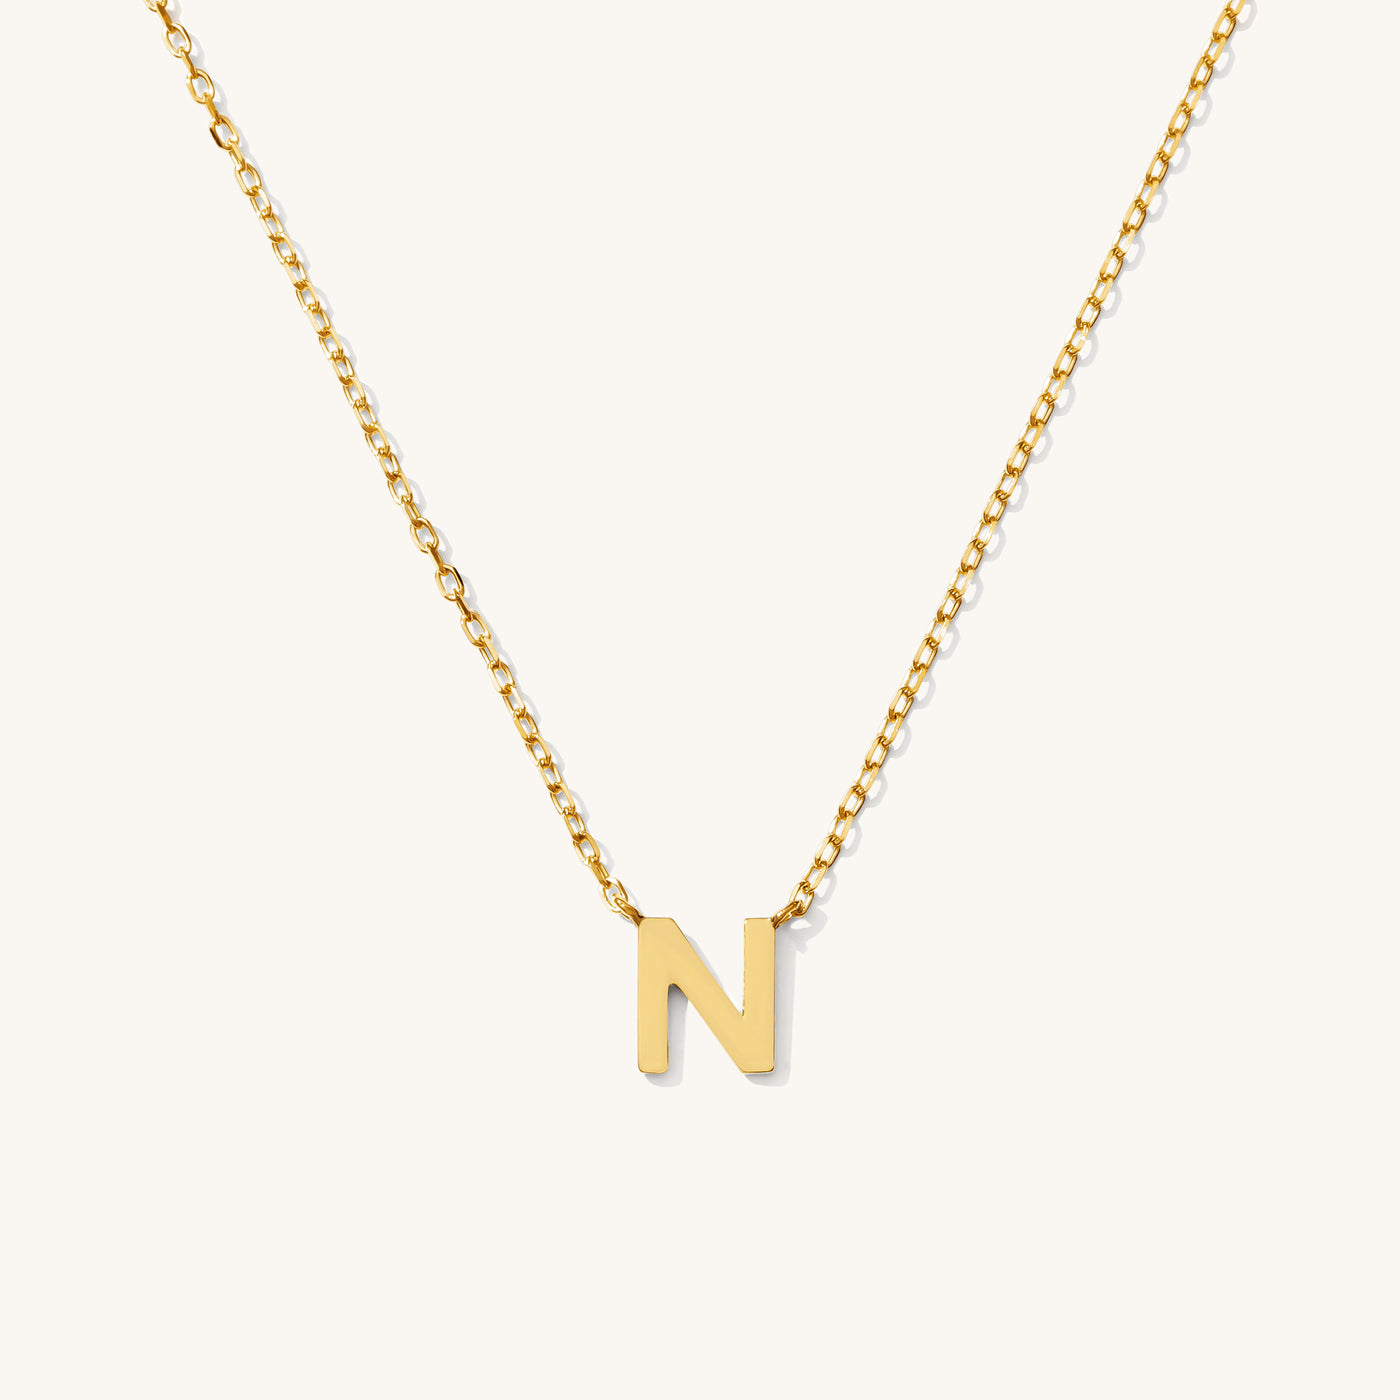 N Tiny Initial Necklace - 14k Solid Gold